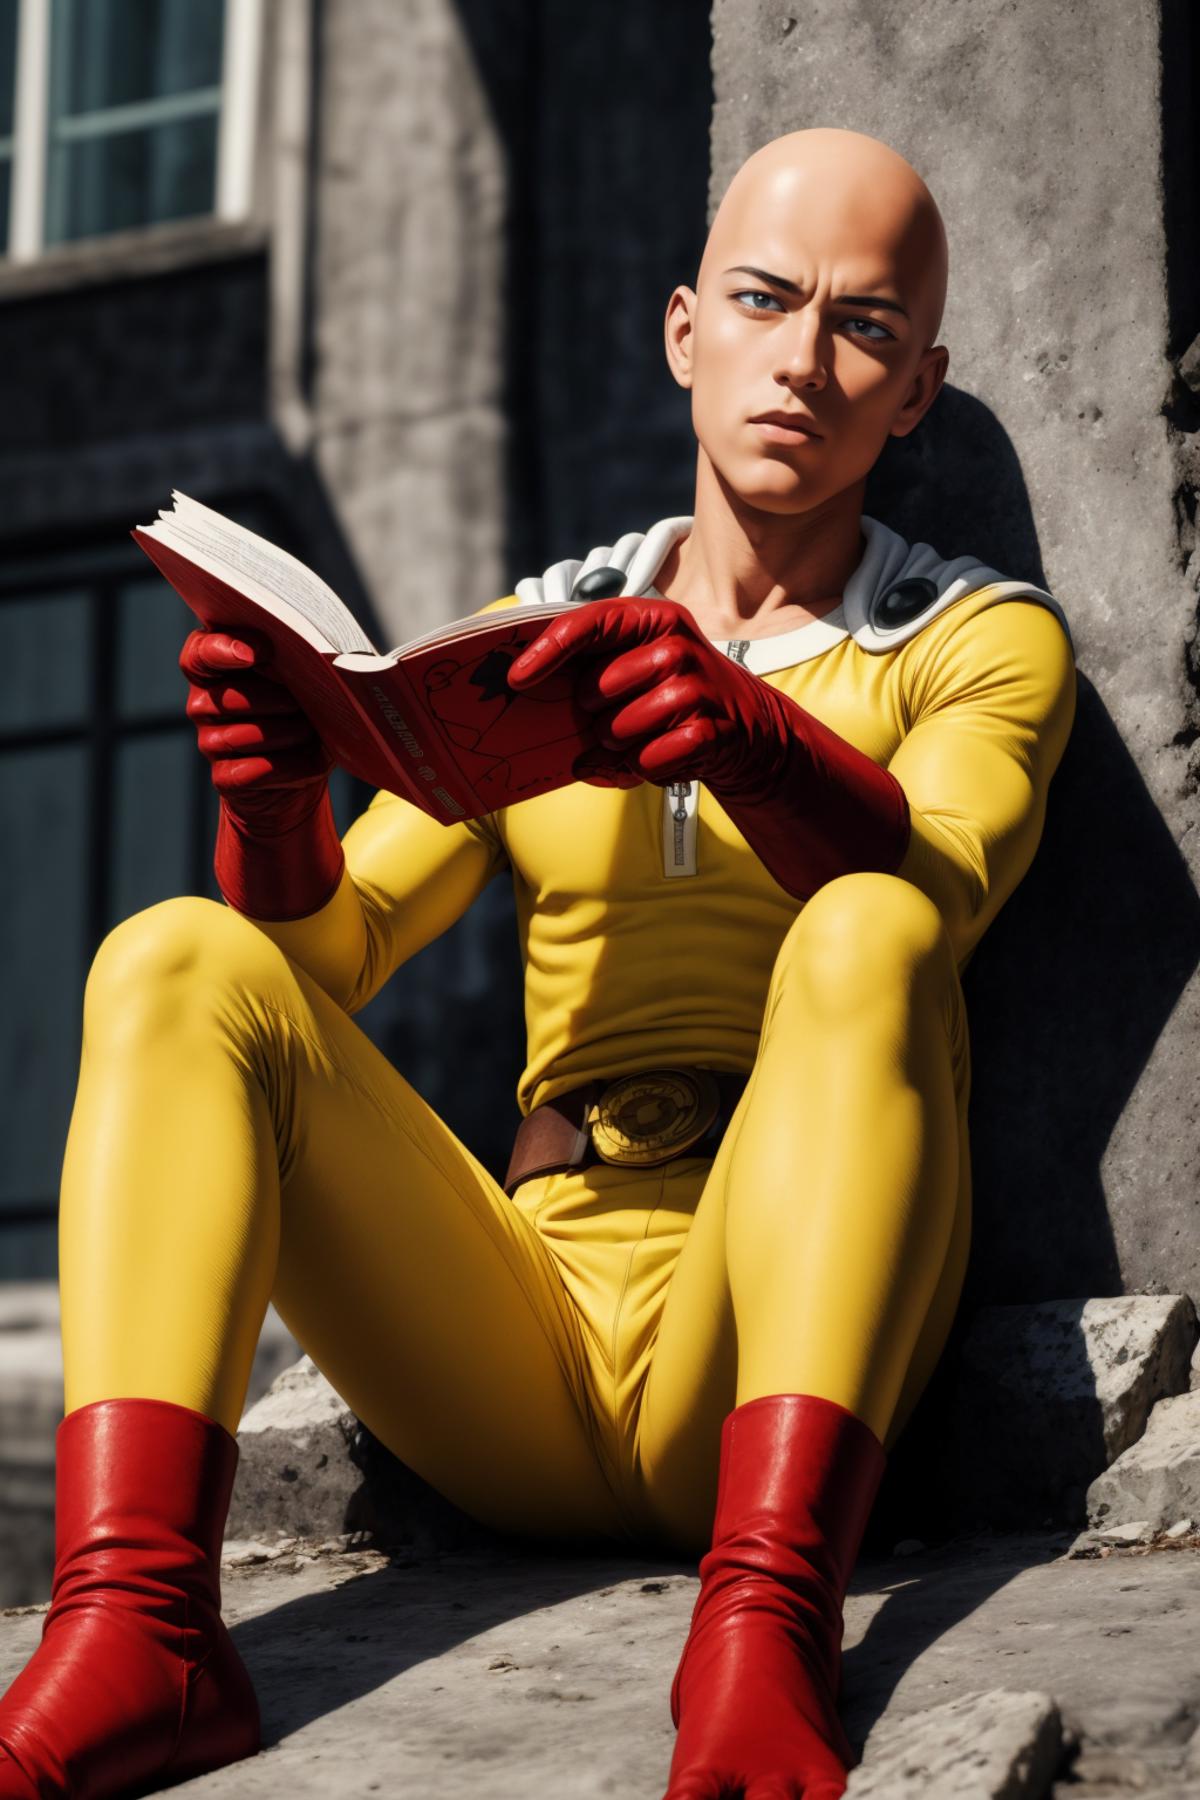 A man in yellow tights reading a book.